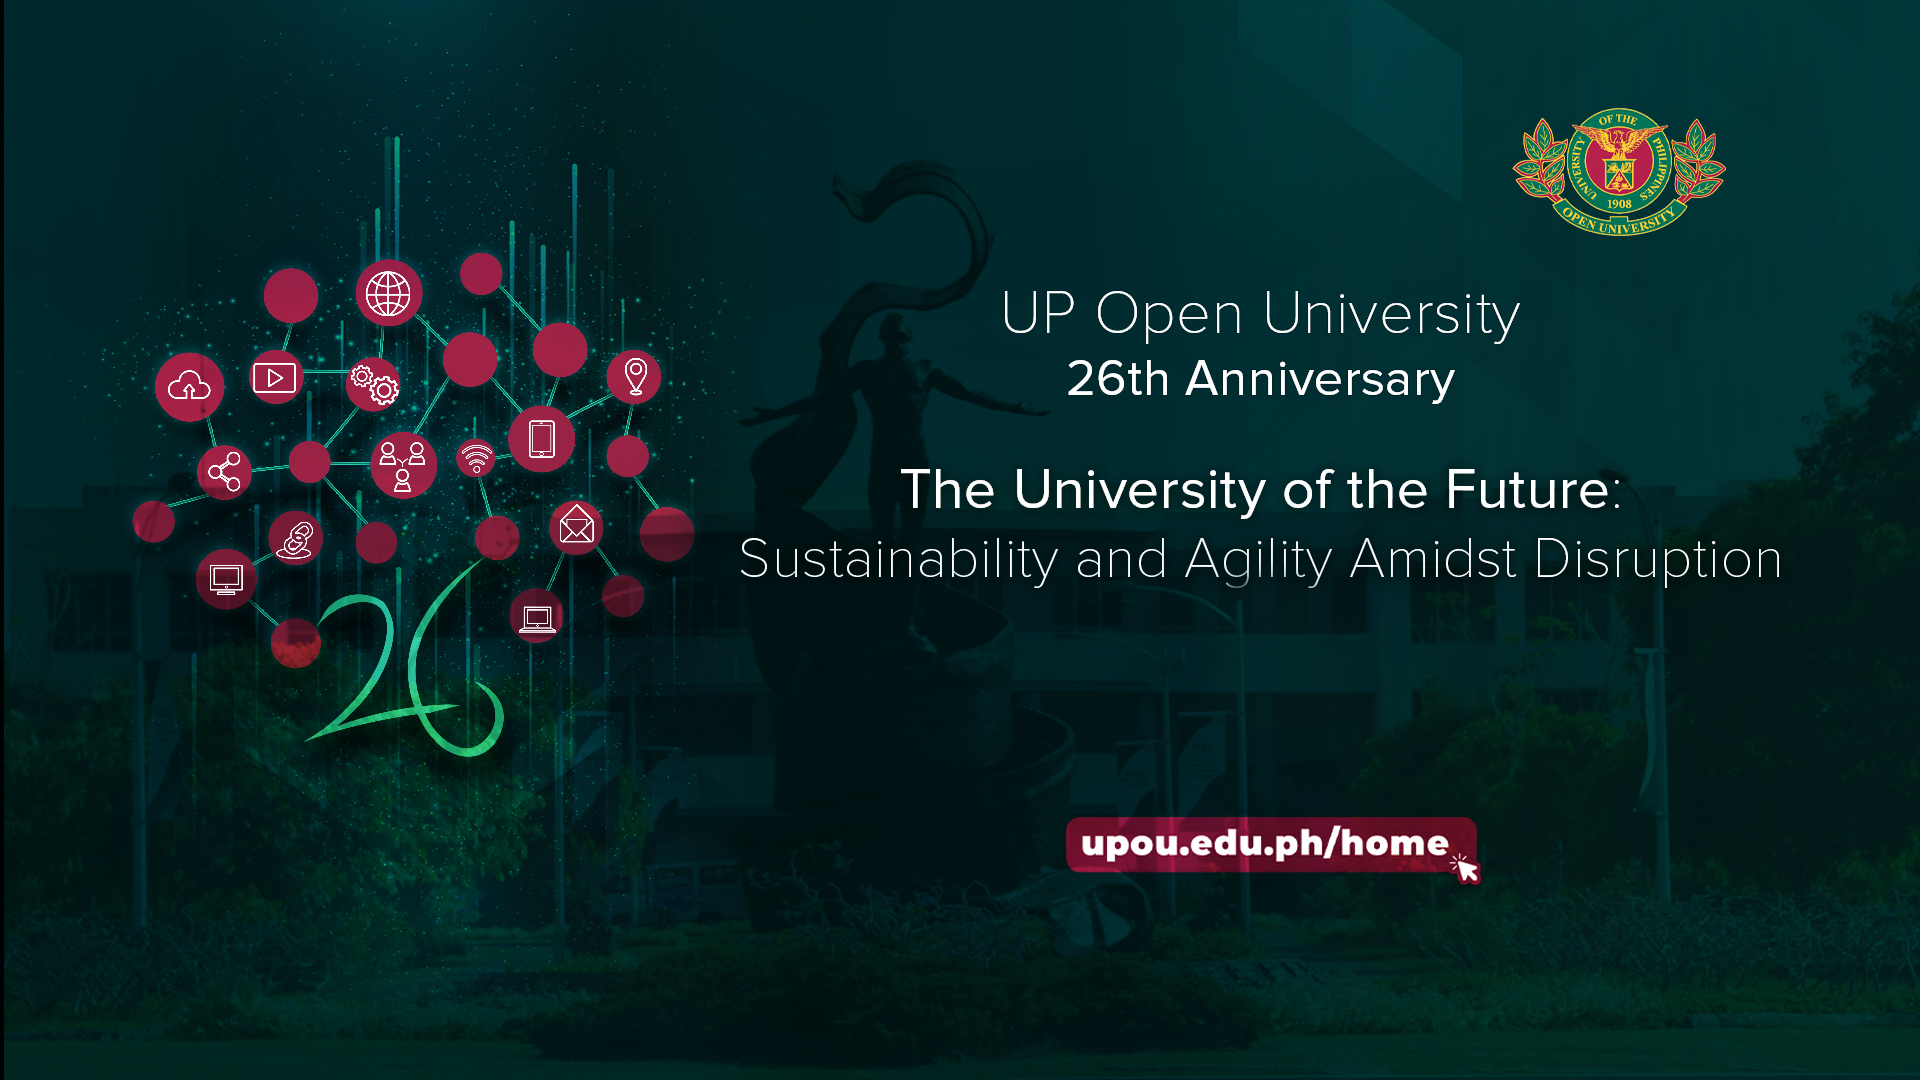 UPOU Celebrates Partners and Launches 2021 Programs during the 26th Anniversary Celebration